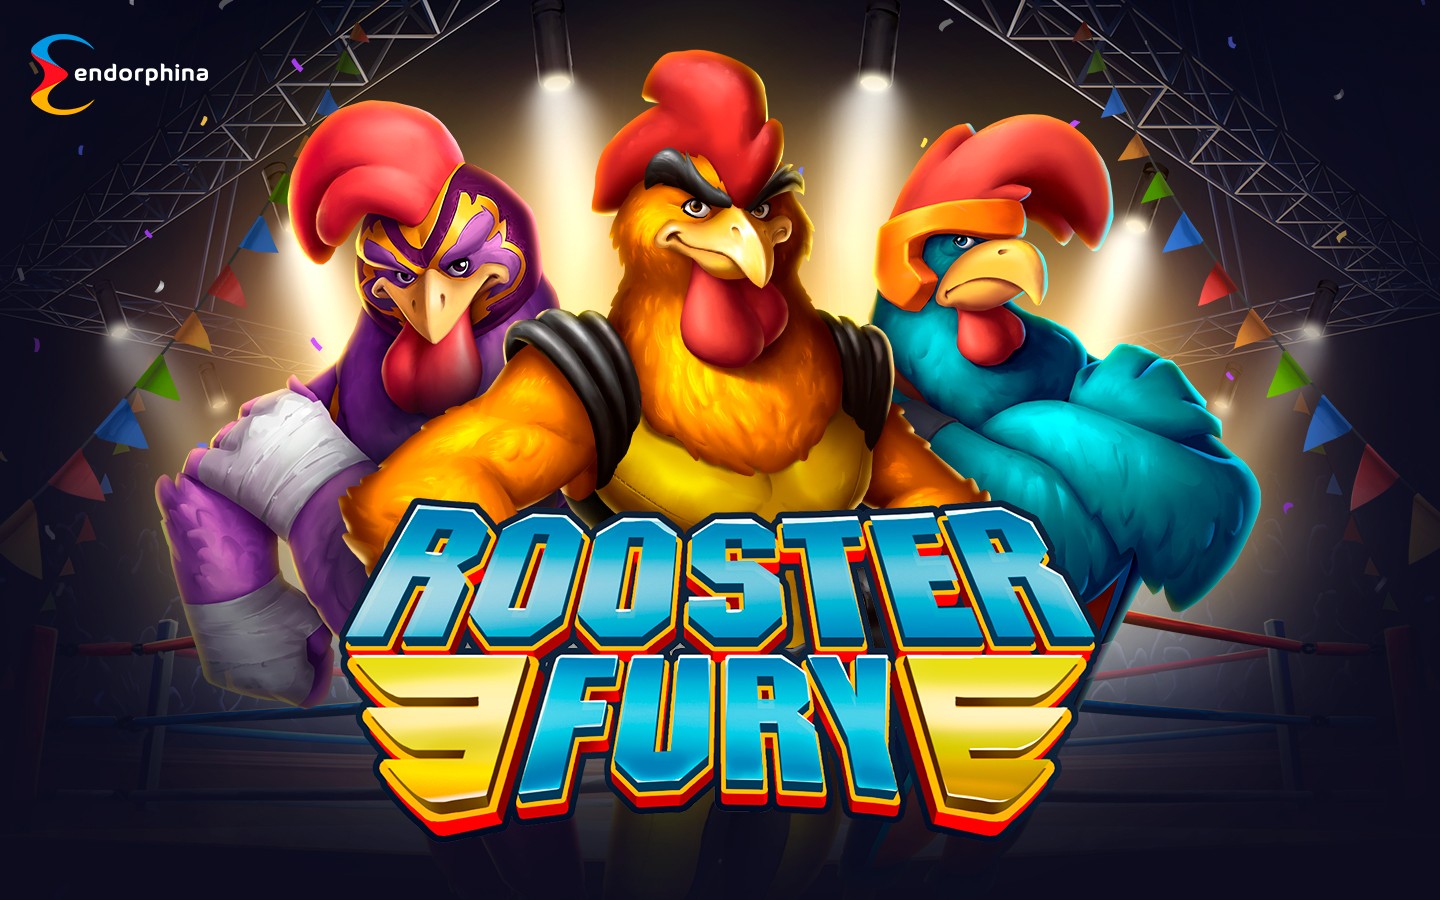 CASINO GAME PROVIDER | Try Rooster Fury game now!